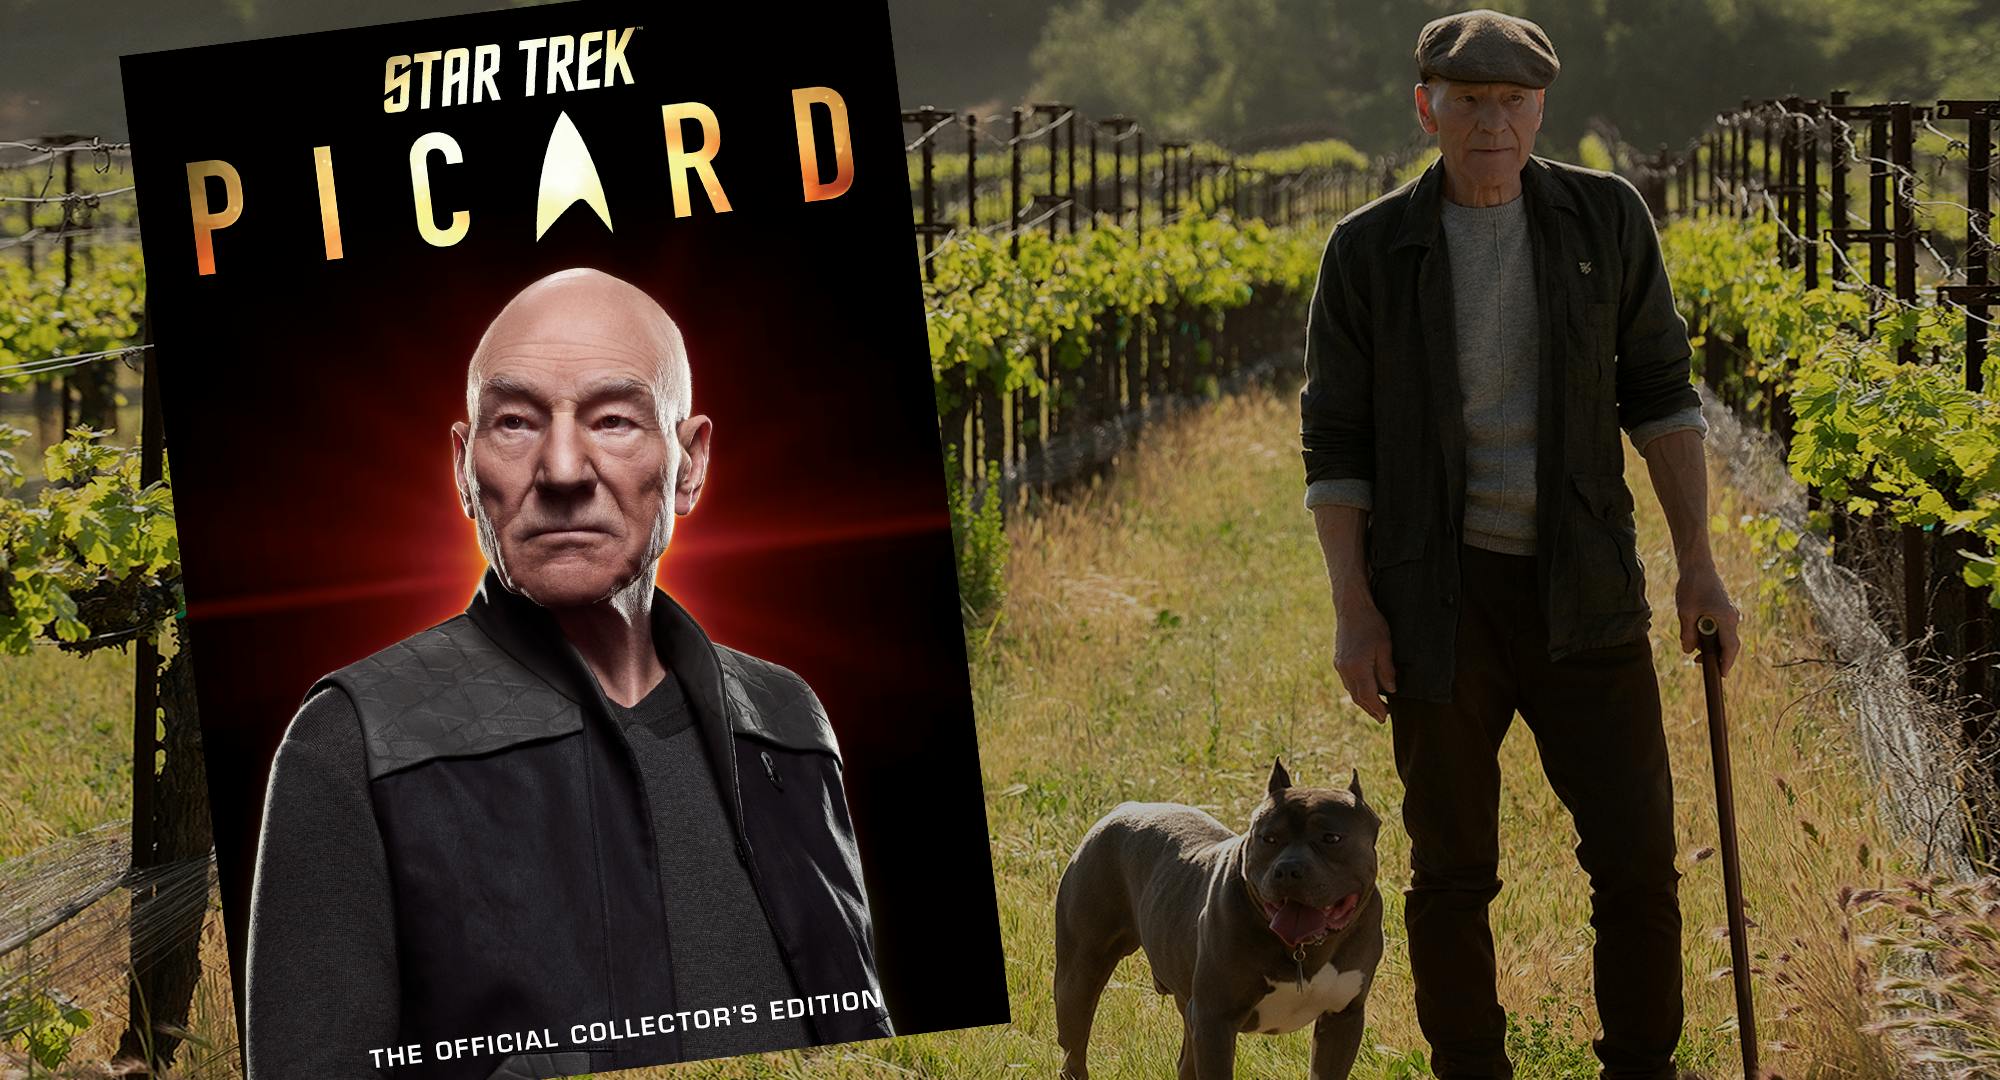 Star Trek: Picard - Official Collector's Edition